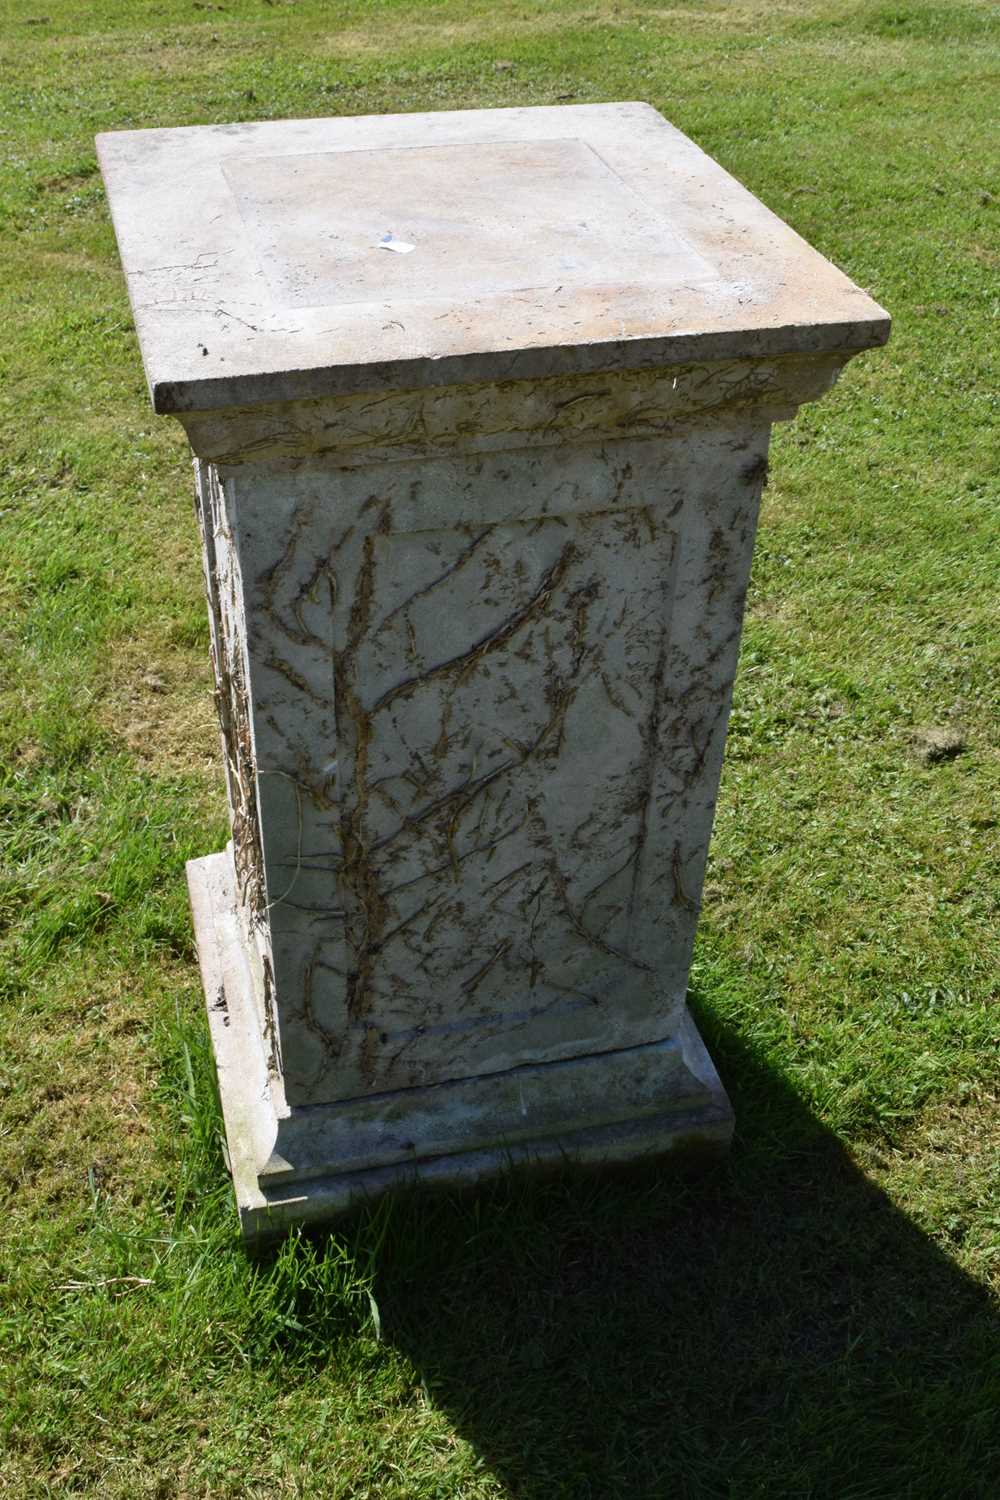 Composition stone garden urn and pedestal - Image 10 of 11